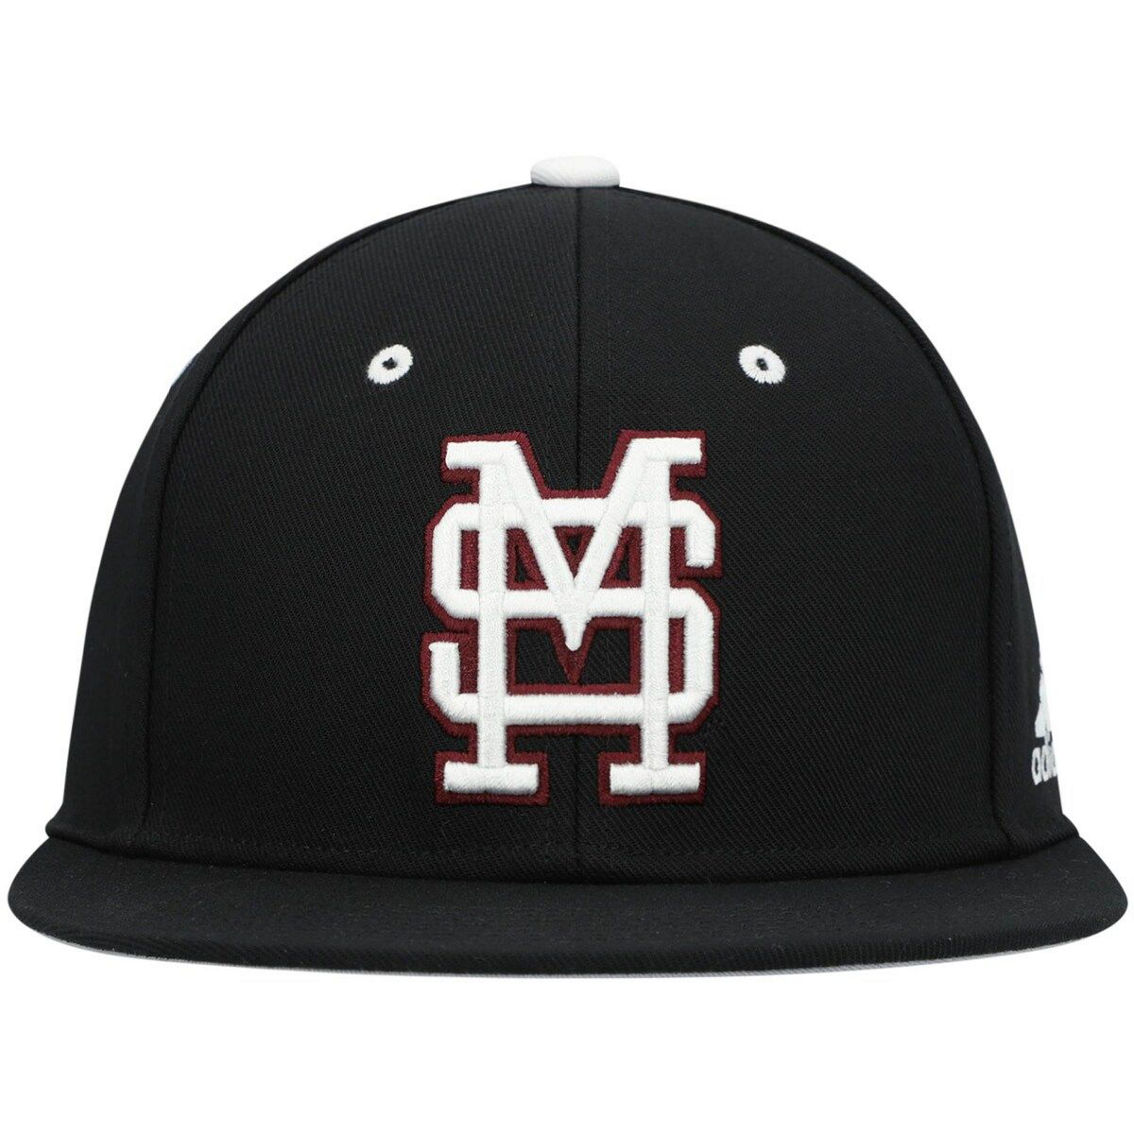 adidas Men's Black Mississippi State Bulldogs On-Field Baseball Fitted Hat - Image 3 of 4